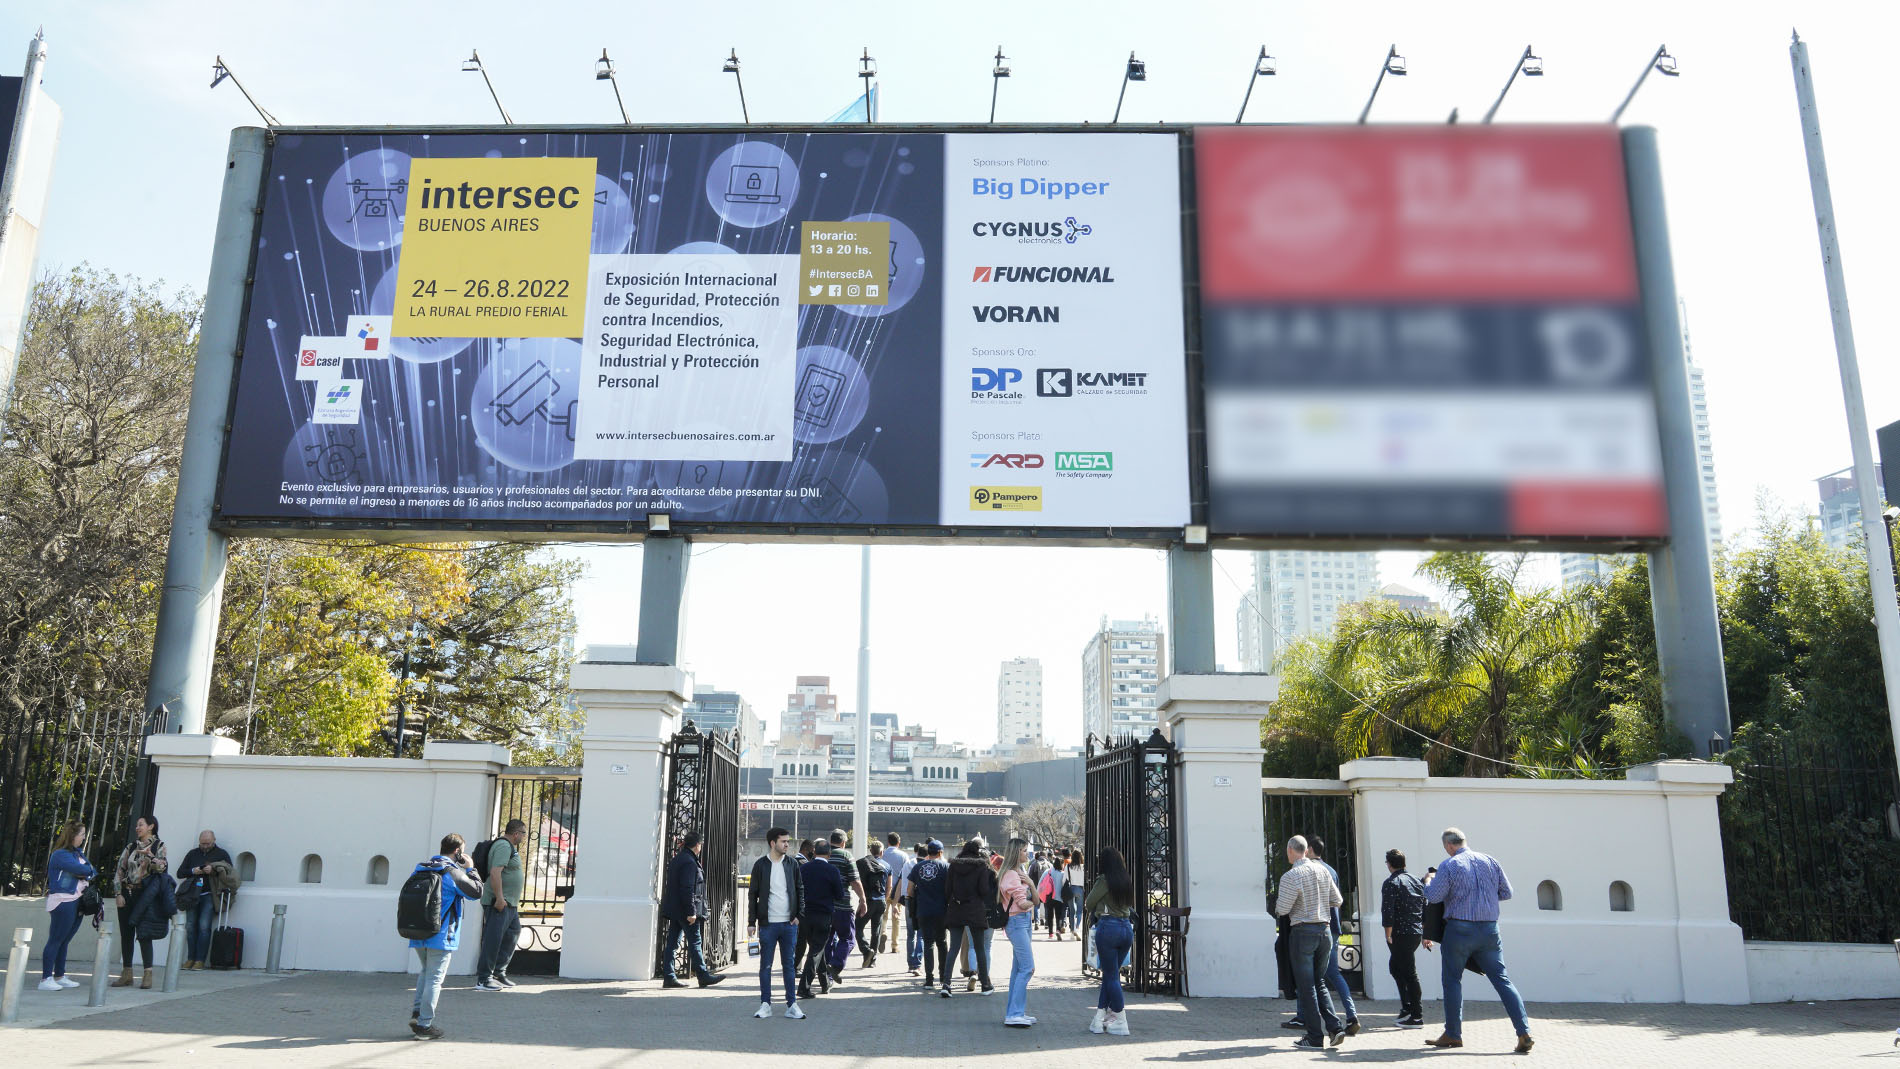 Access to Intersec Buenos Aires